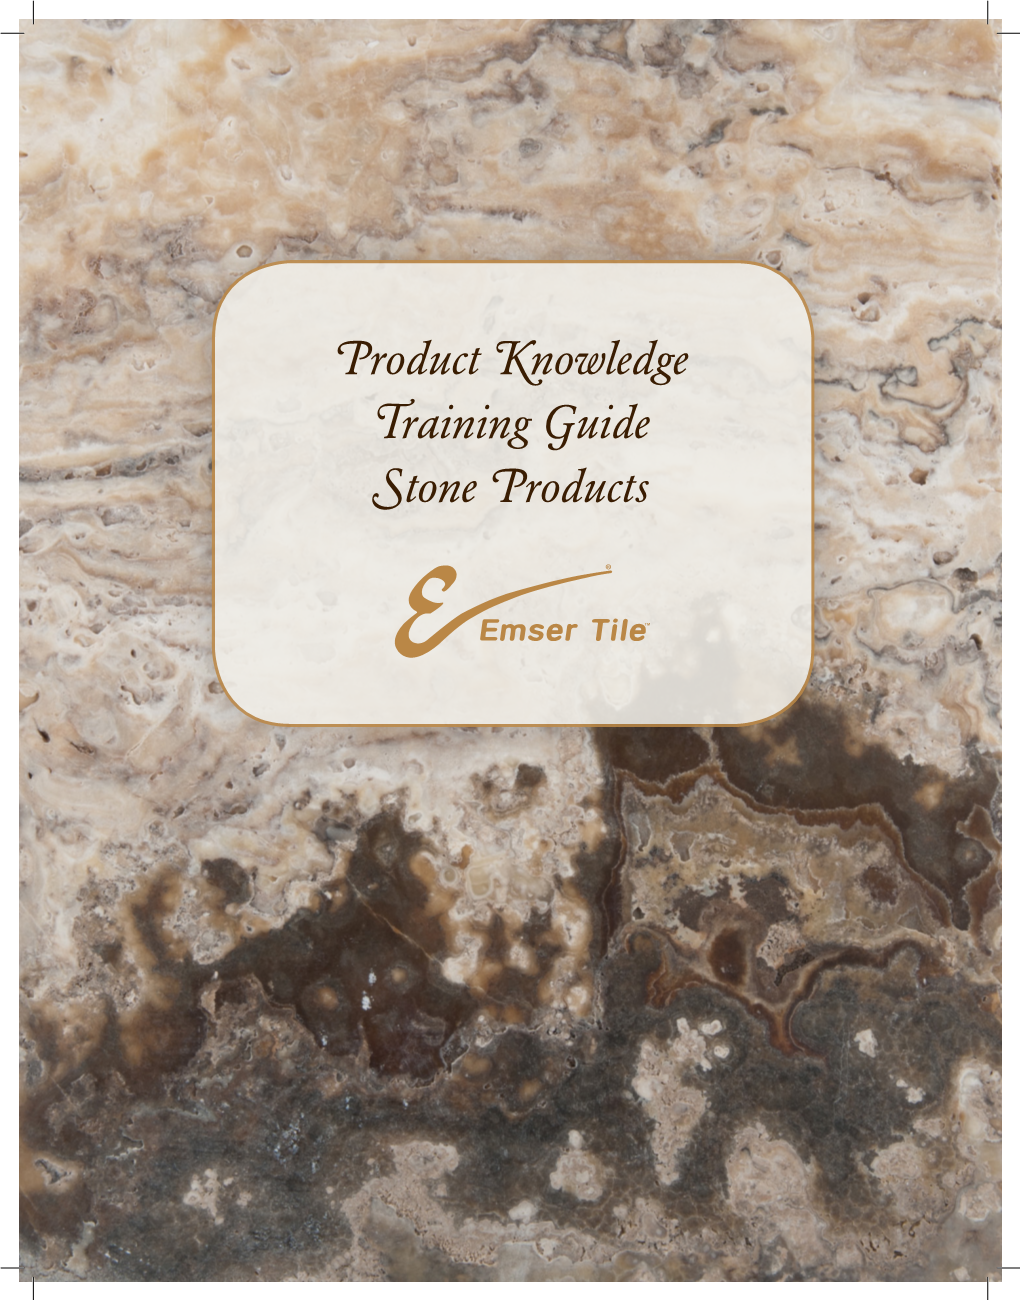 Stone Products Contents